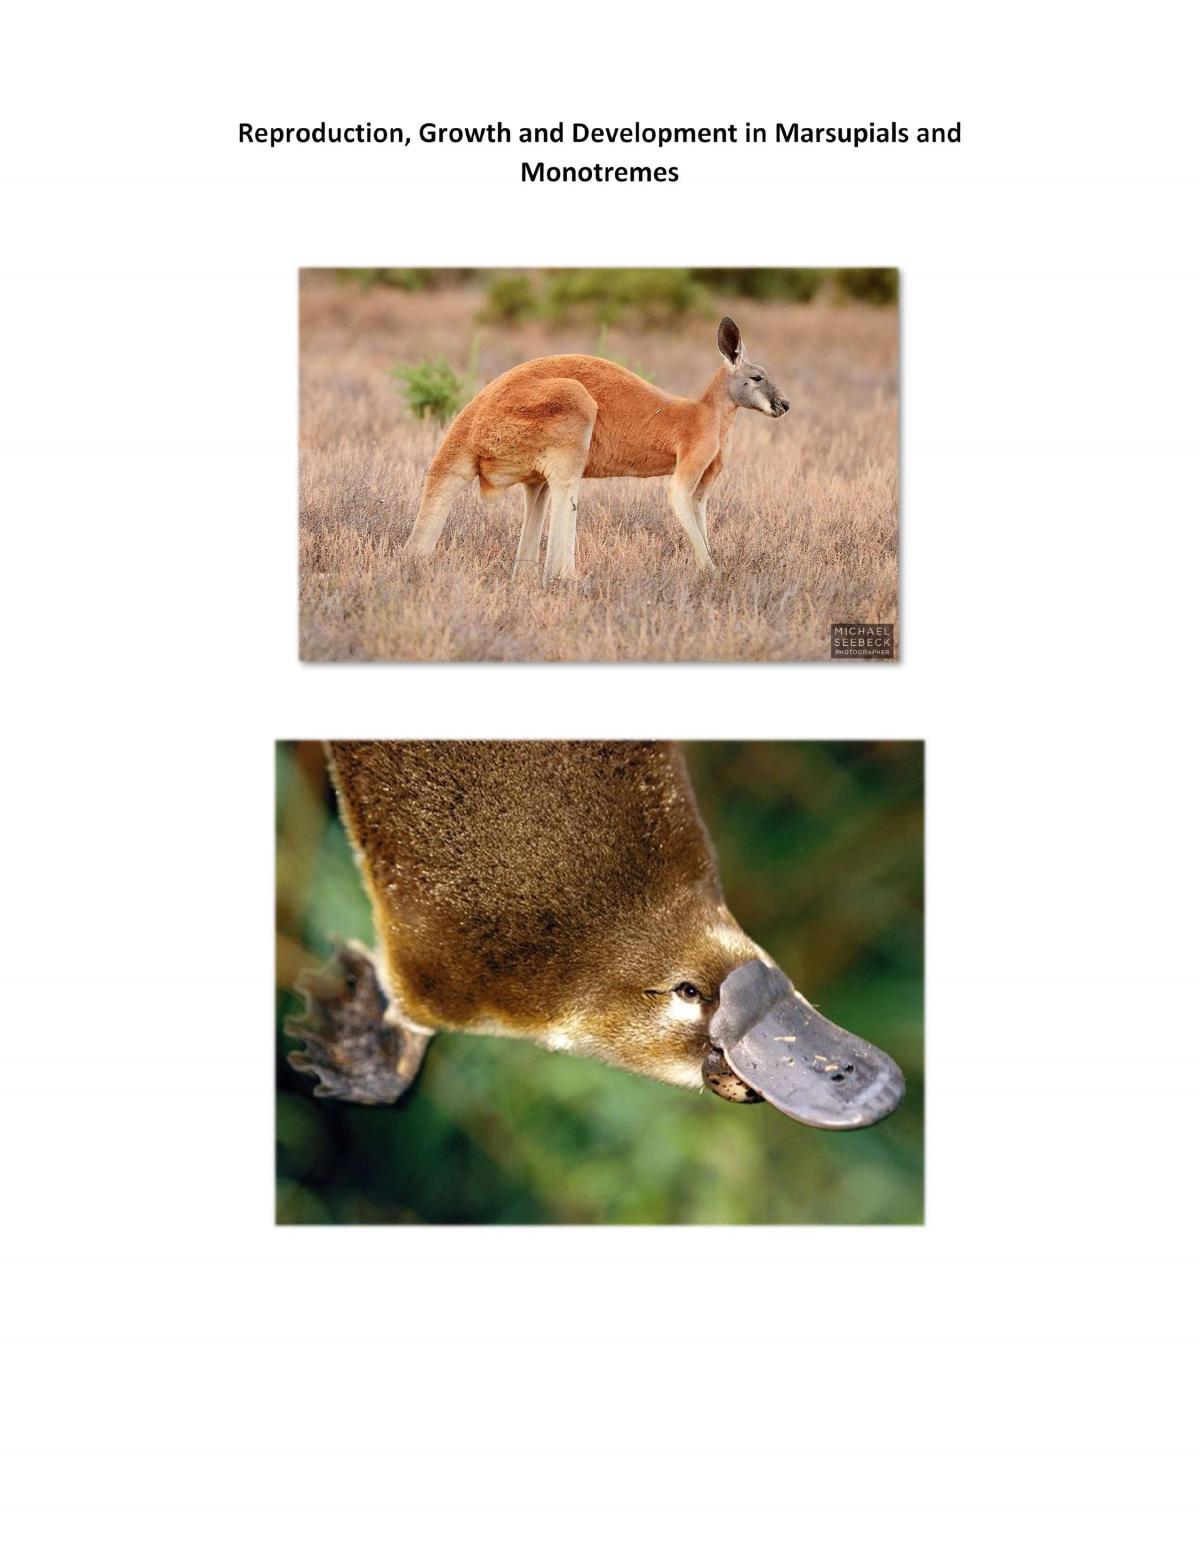 Reproduction, Growth and Development in Marsupials and Monotremes  - Page 1